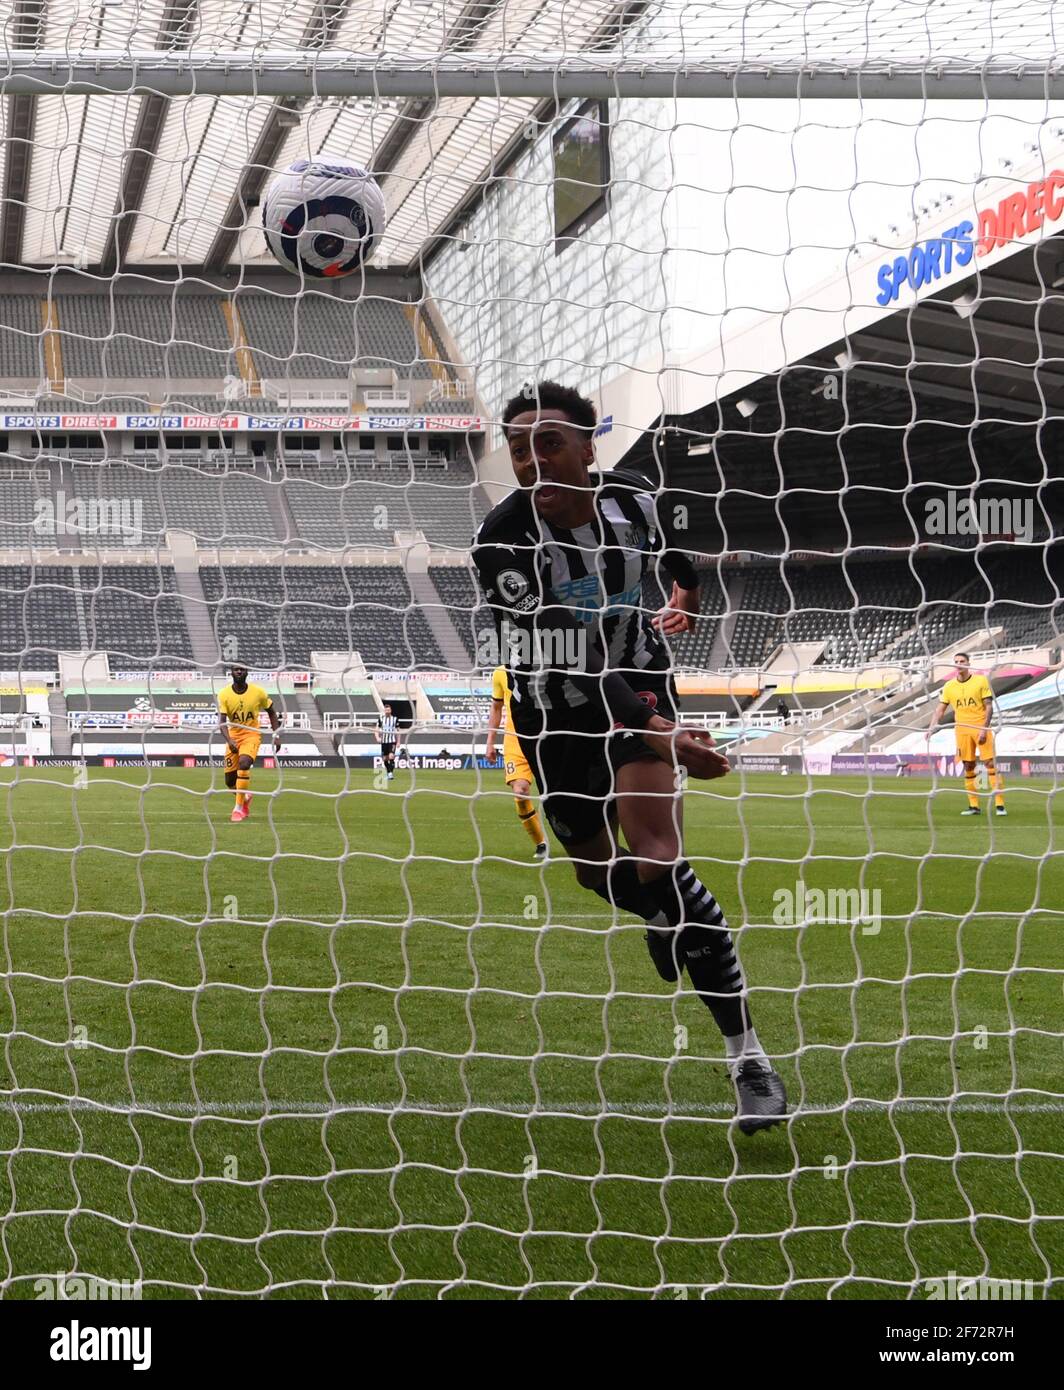 Newcastle United's Joe Willock scores their side's second goal of the game during the Premier League match at St James' Park, Newcastle. Picture date: Sunday April 4, 2021. Stock Photo